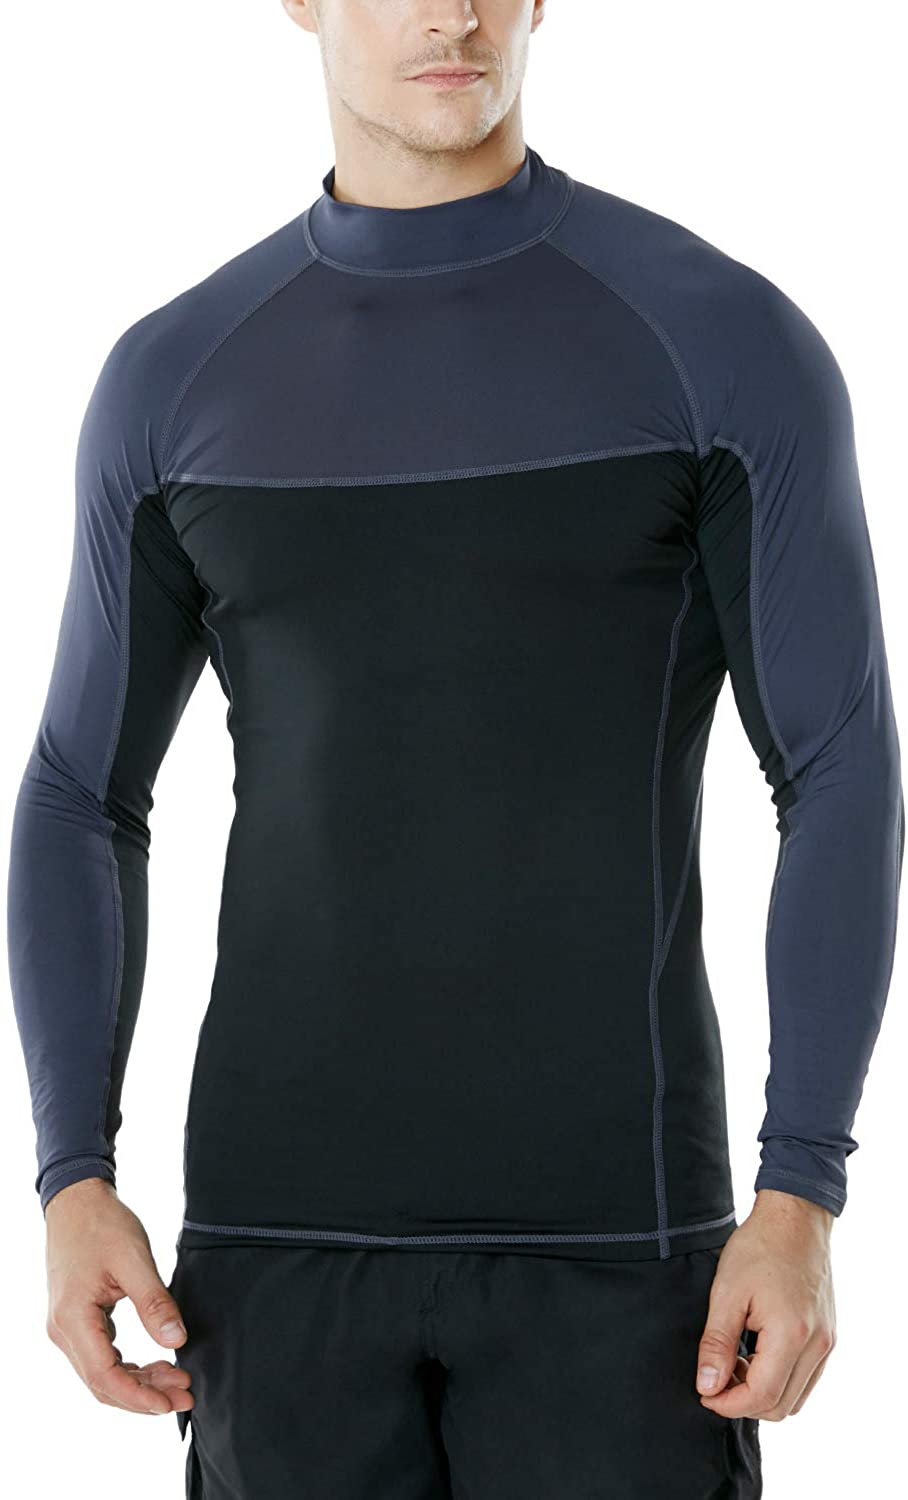 2 or 3 Pack Men's UPF 50+ Long Sleeve Compression Shirts Water Sports Rash Guard TSLA 1 Athletic Workout Shirt 